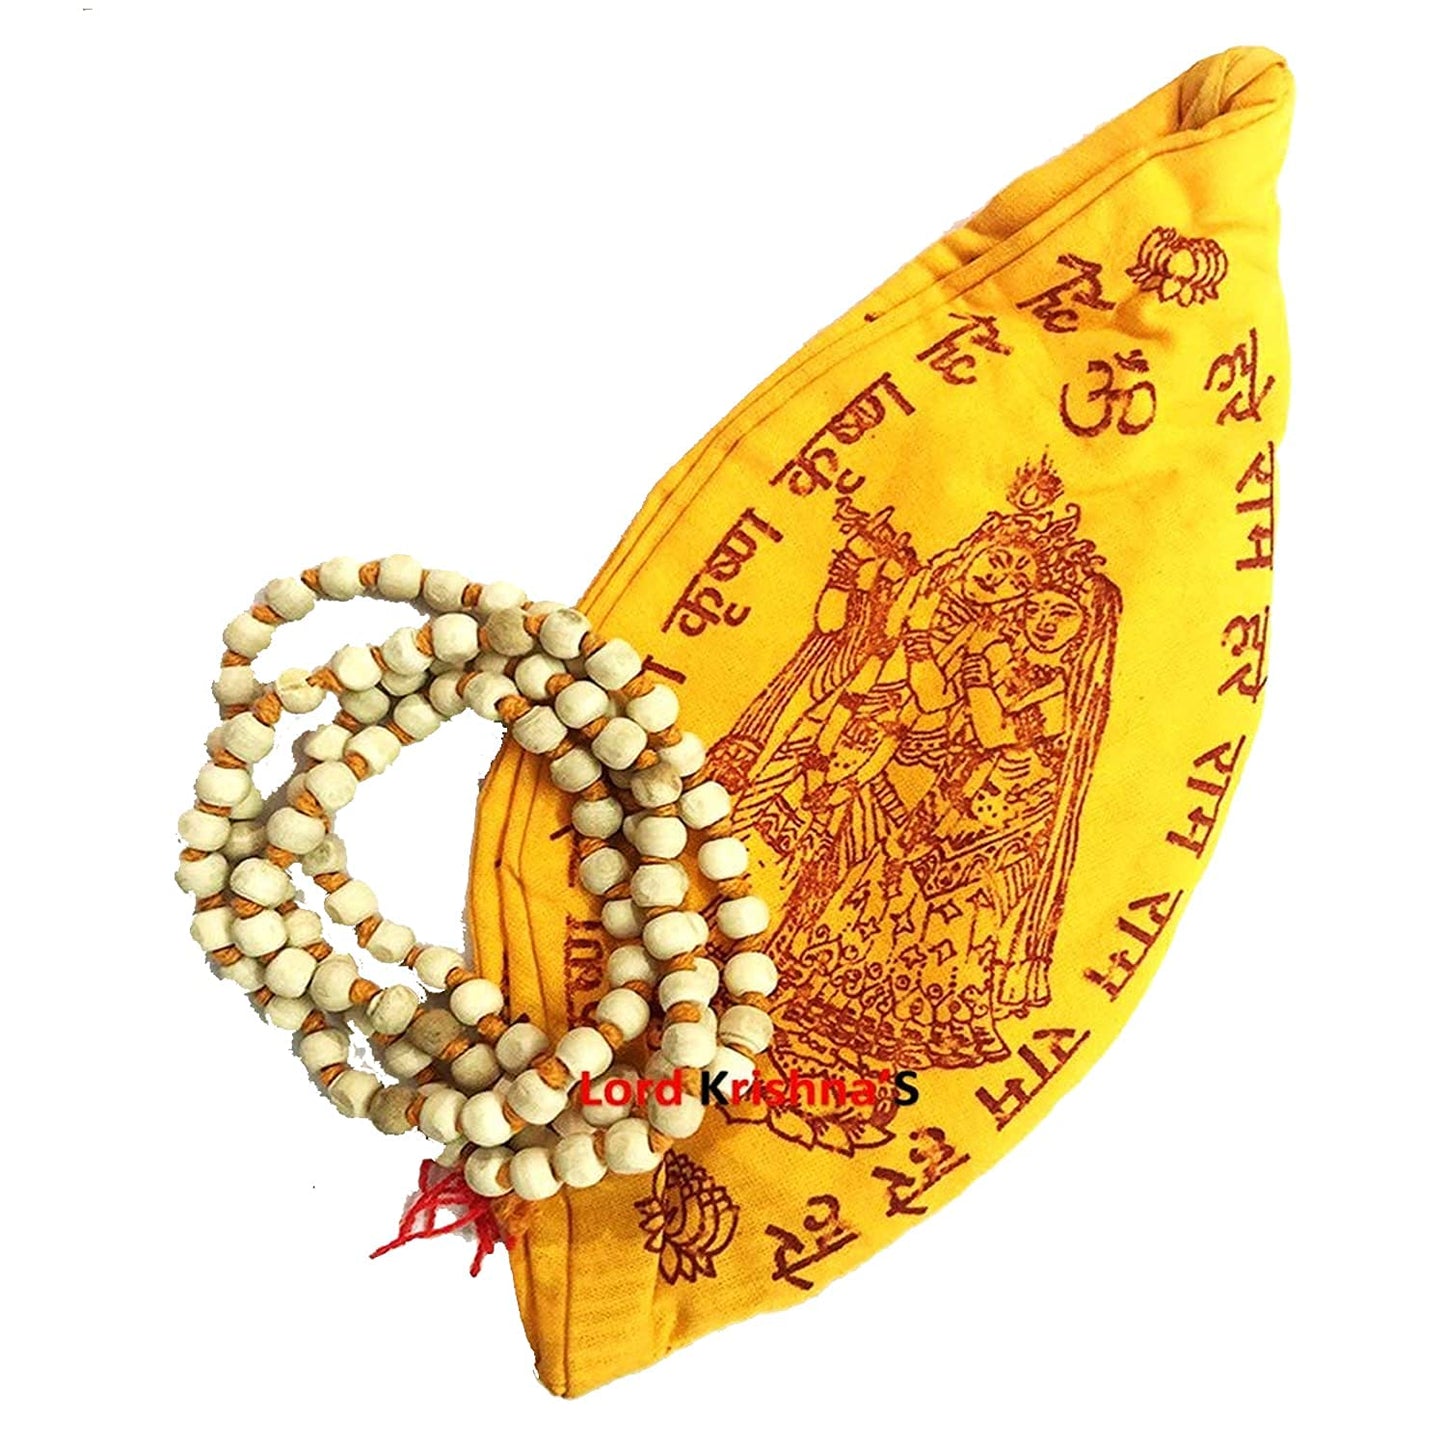 Pujahome Tulsi Japa Mala 108+1(8mm) Beads Pure Tulsi Jap Mala for Mantra Jaap with Goumukhi Jaap Bag (Combo Pack 2)